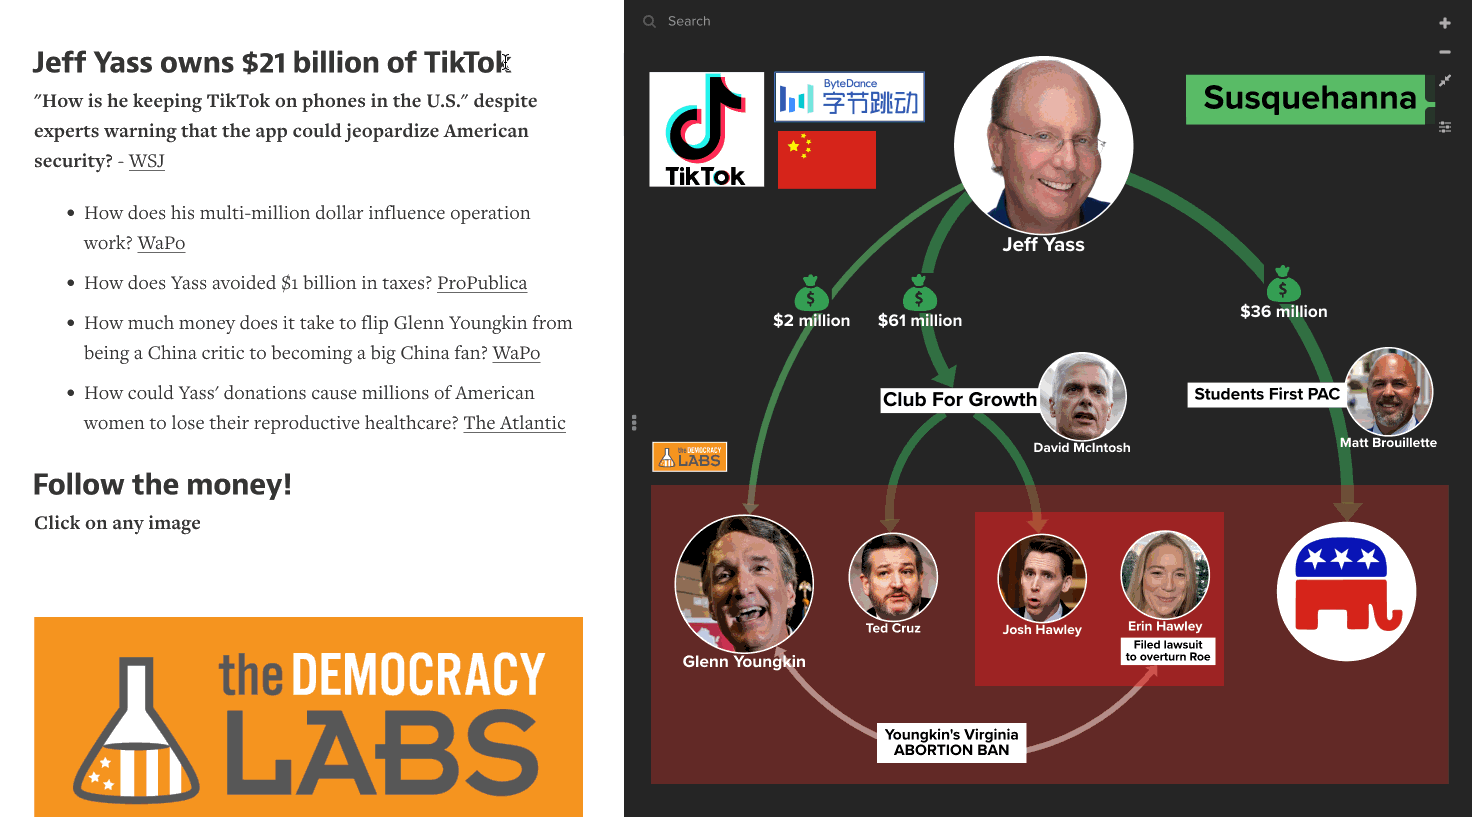 Jeff Yass is a big Republican donor and holds over $21 billion of TikTok stock